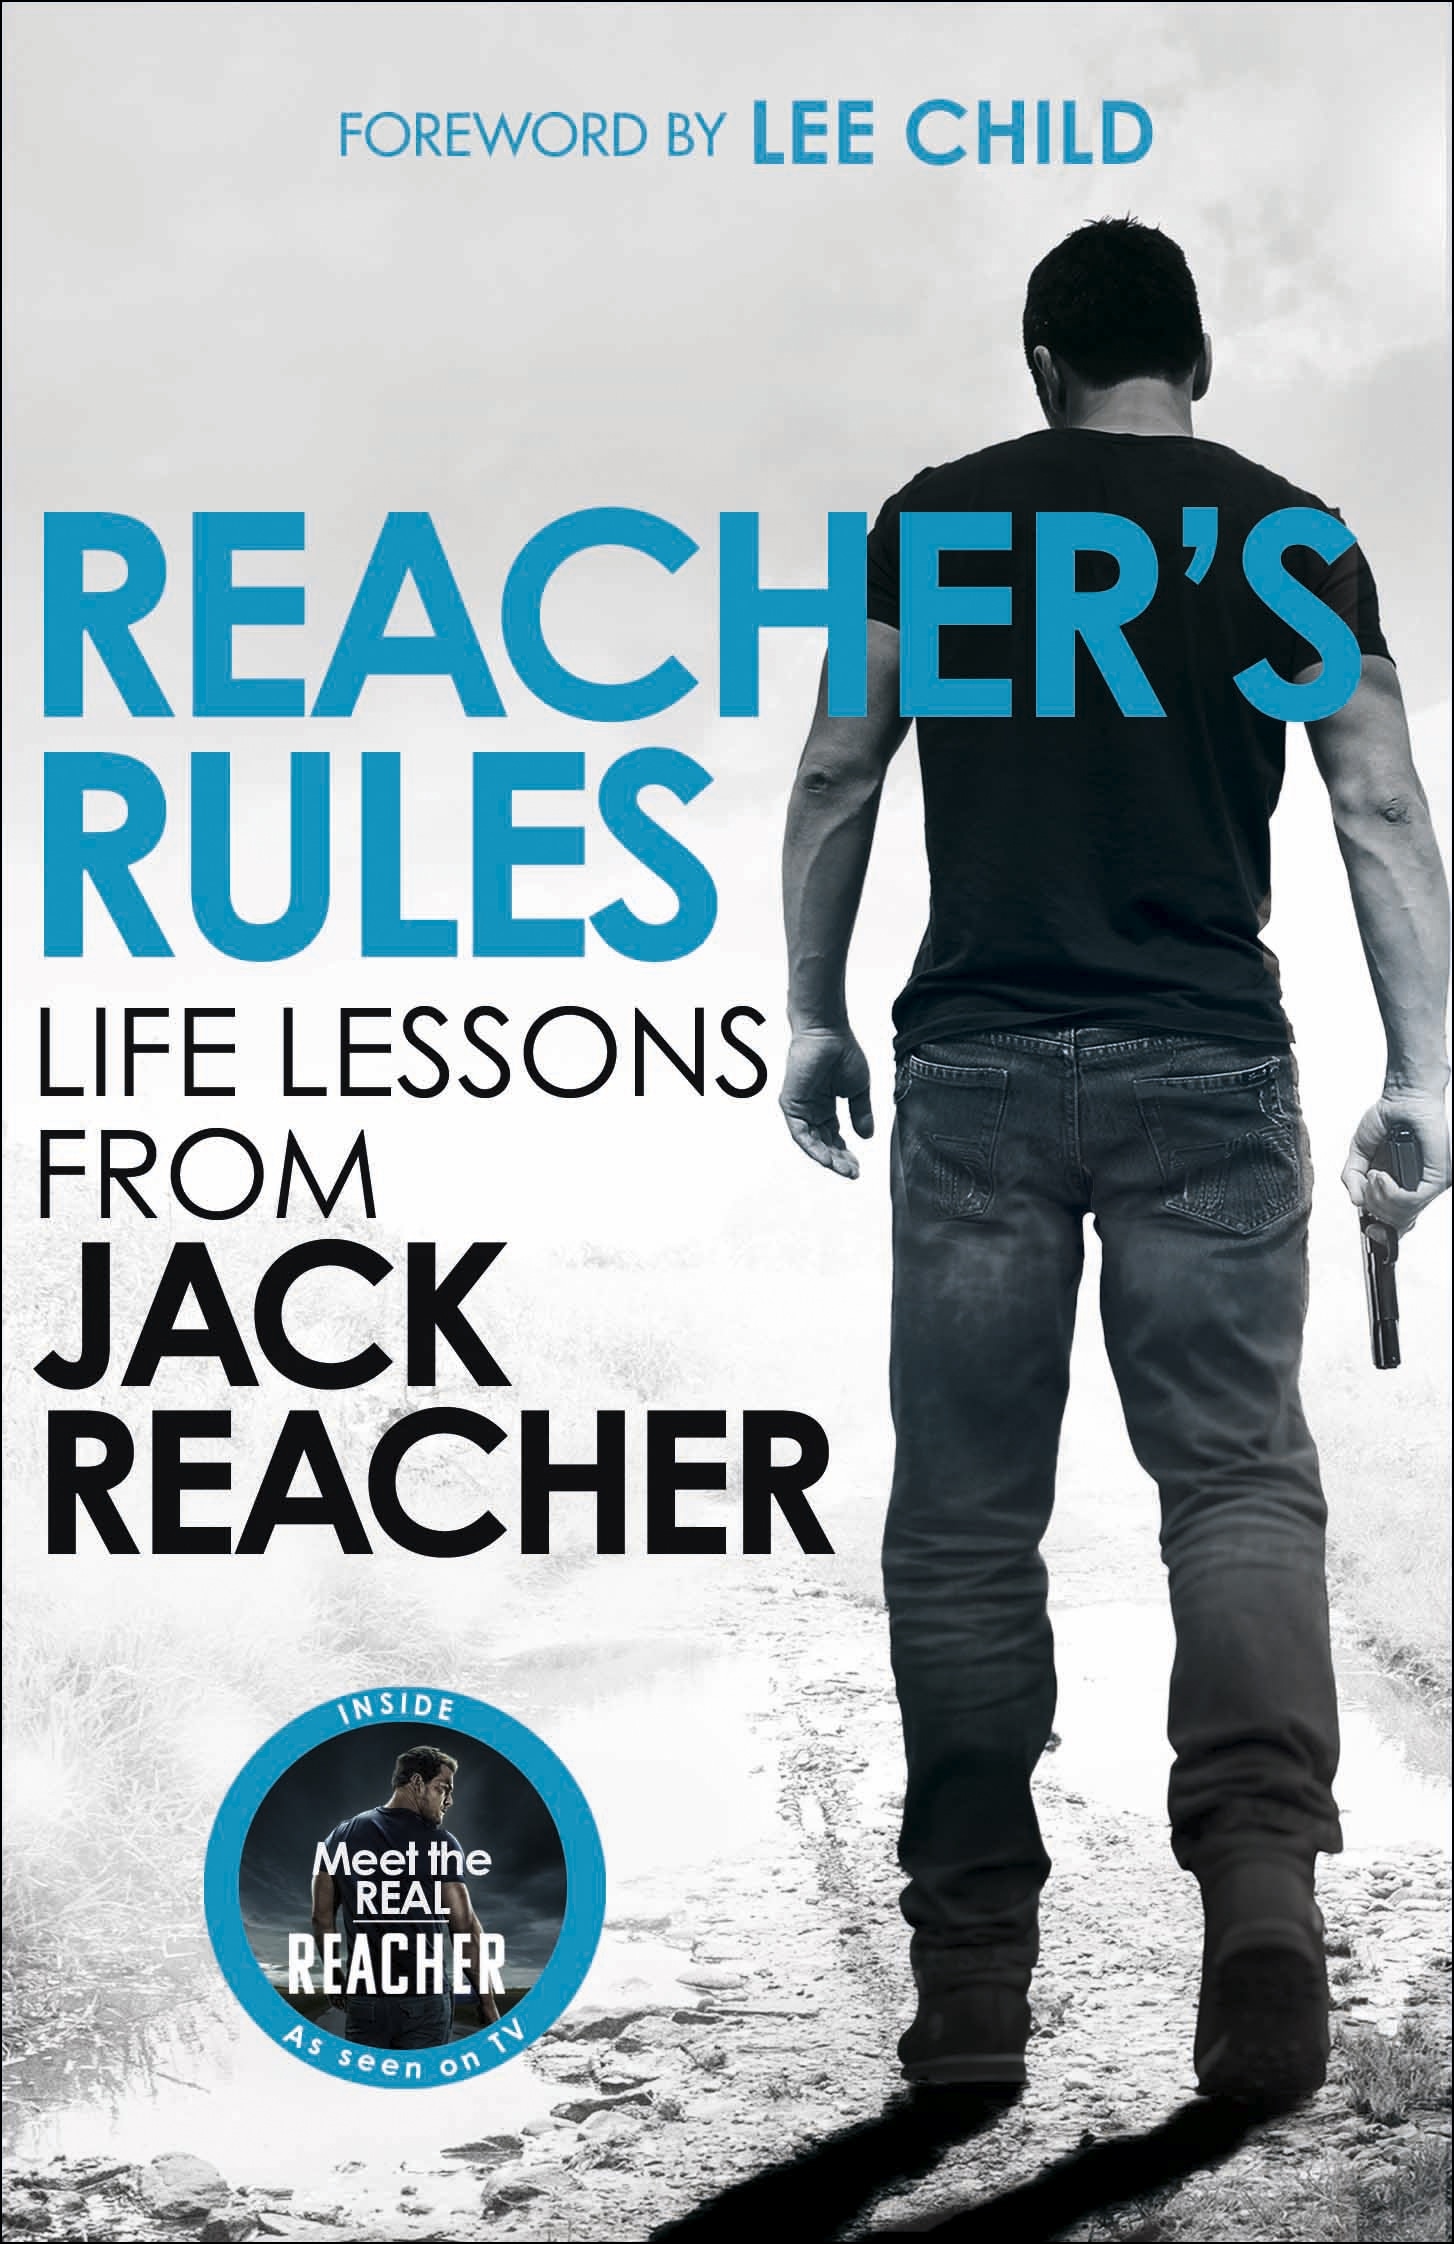 Book “Reacher's Rules: Life Lessons From Jack Reacher” by Jack Reacher — November 10, 2022